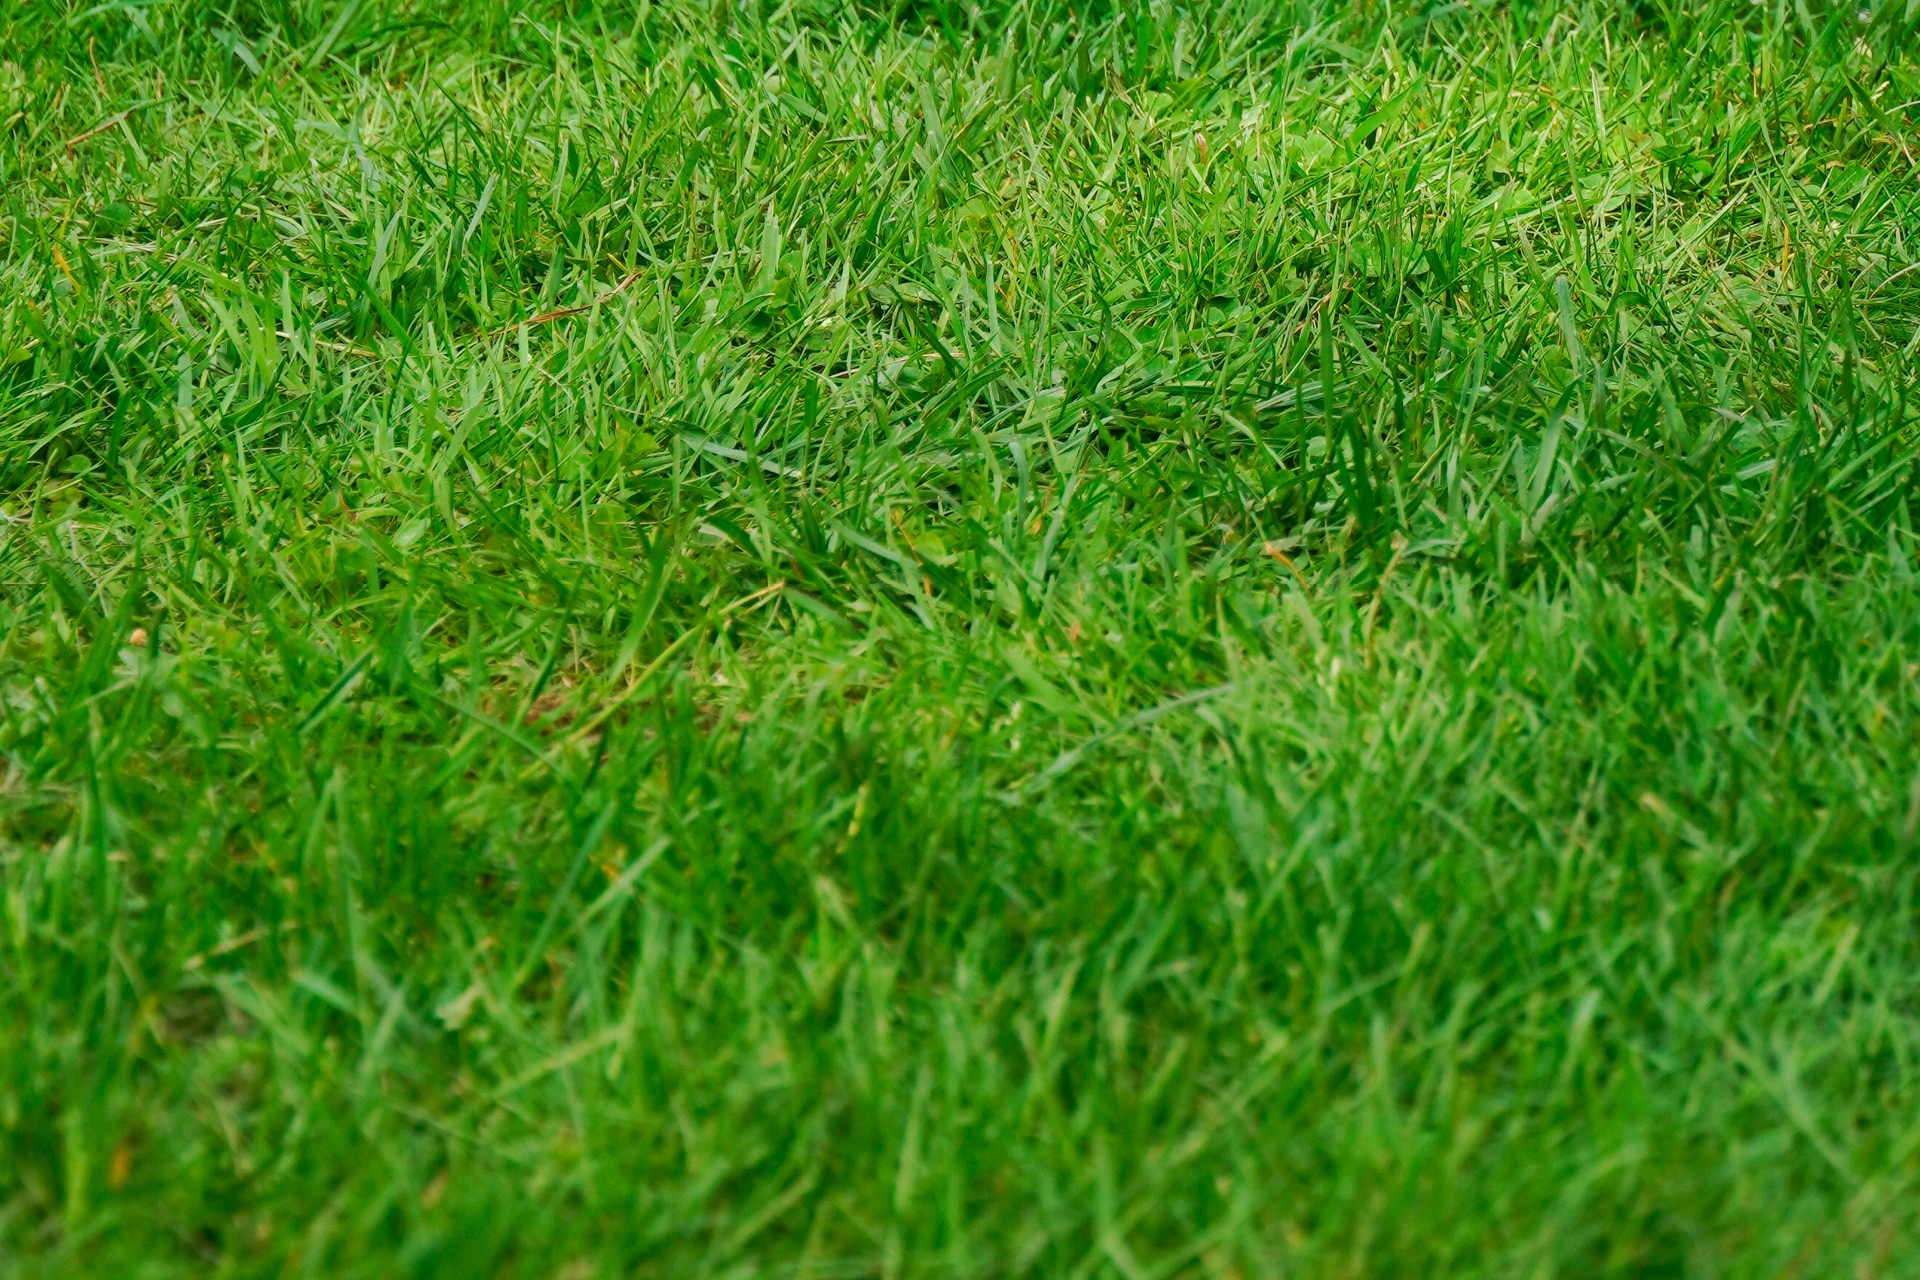 A close-up photo of a grassy lawn